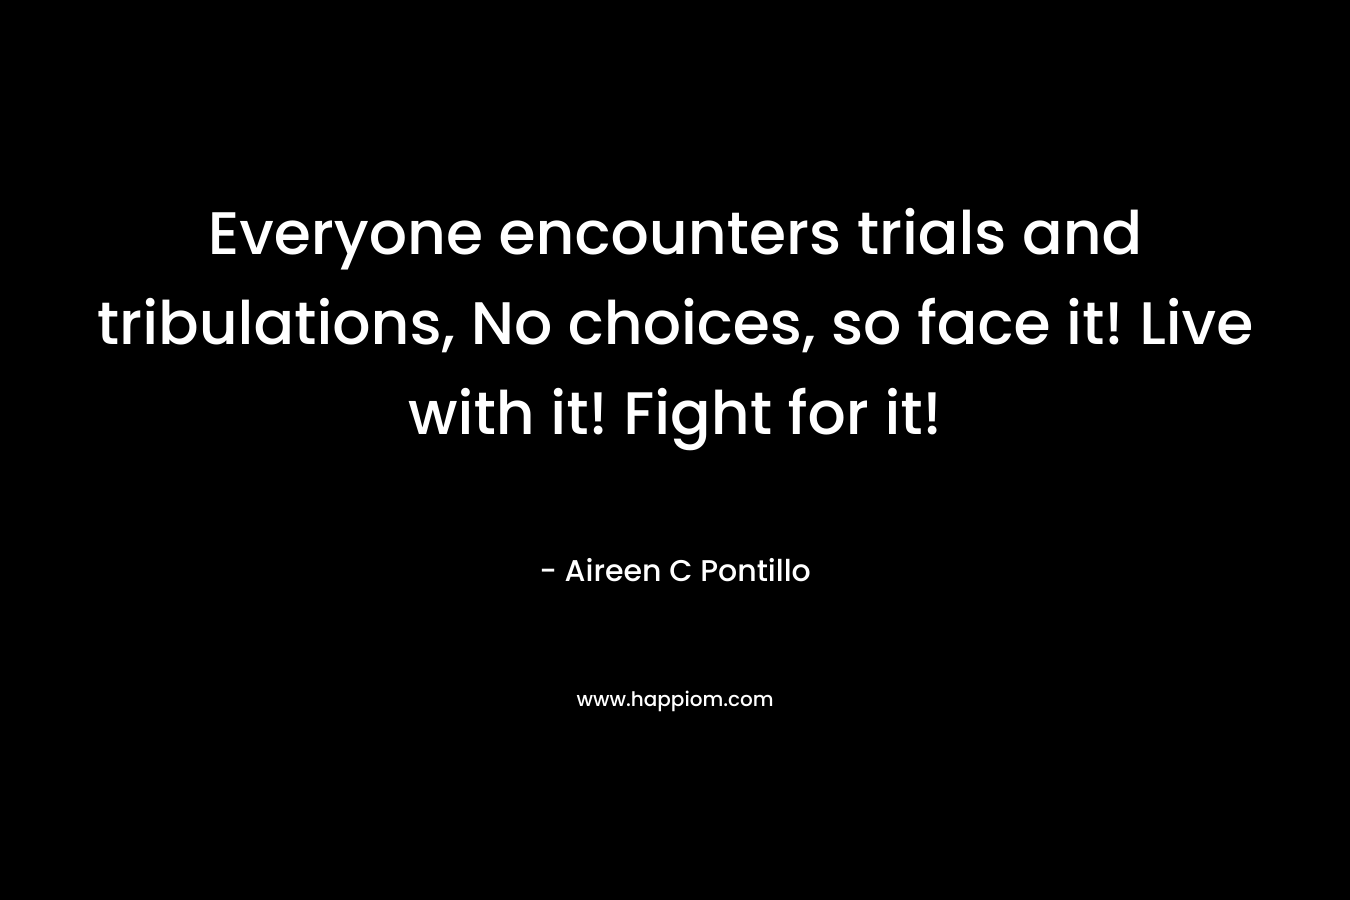 Everyone encounters trials and tribulations, No choices, so face it! Live with it! Fight for it! – Aireen C Pontillo